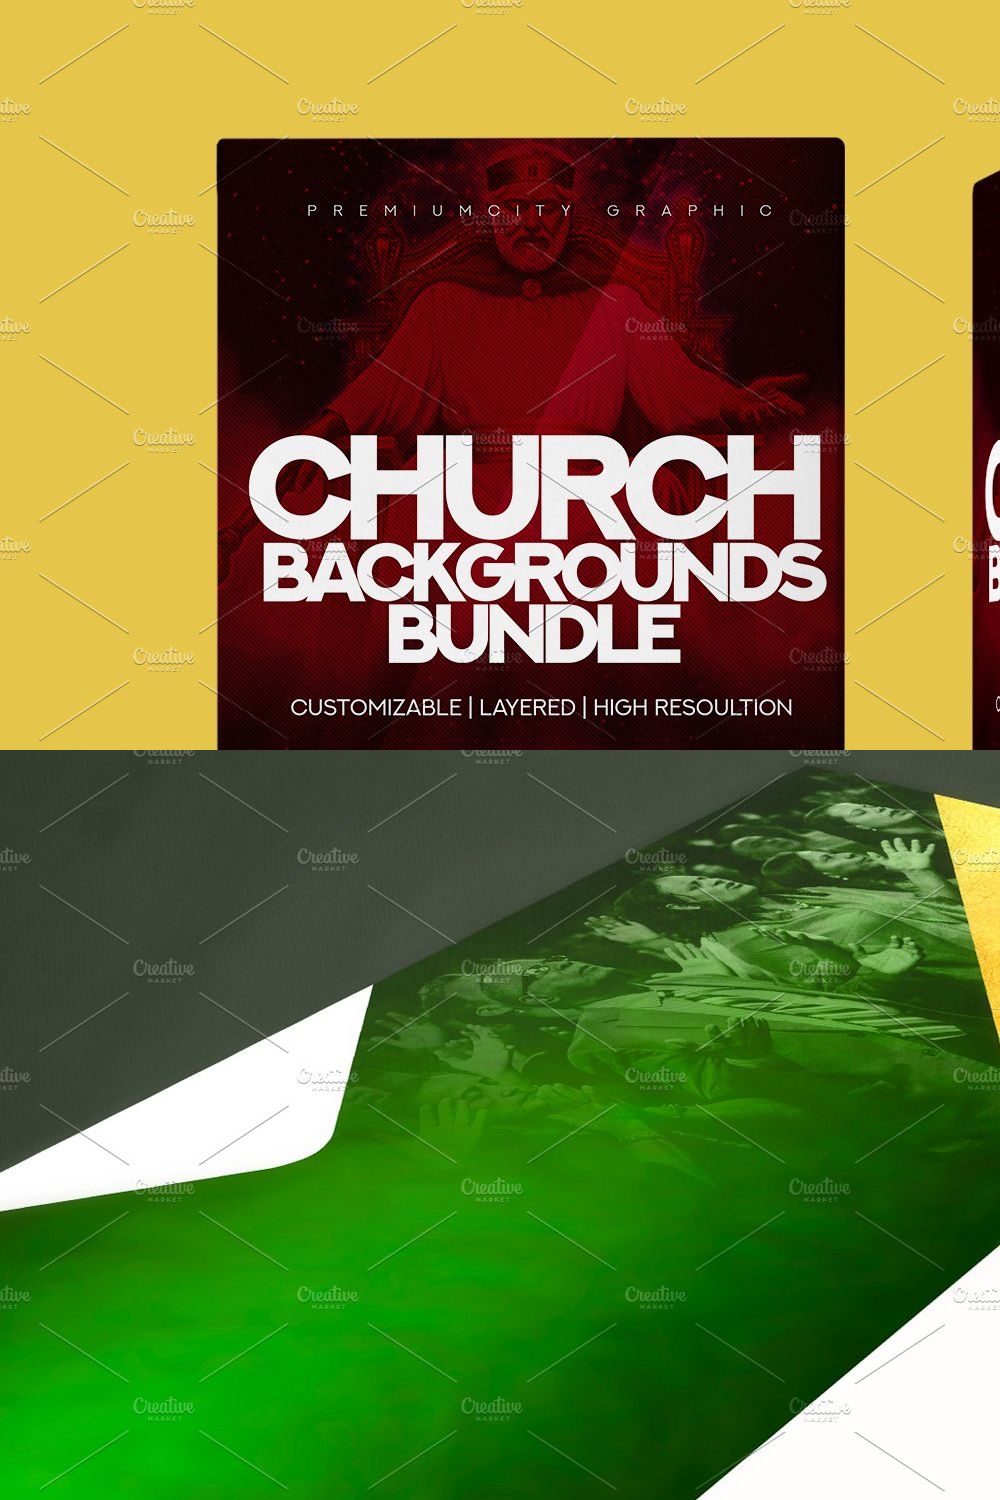 13 Church backgrounds templates pinterest preview image.